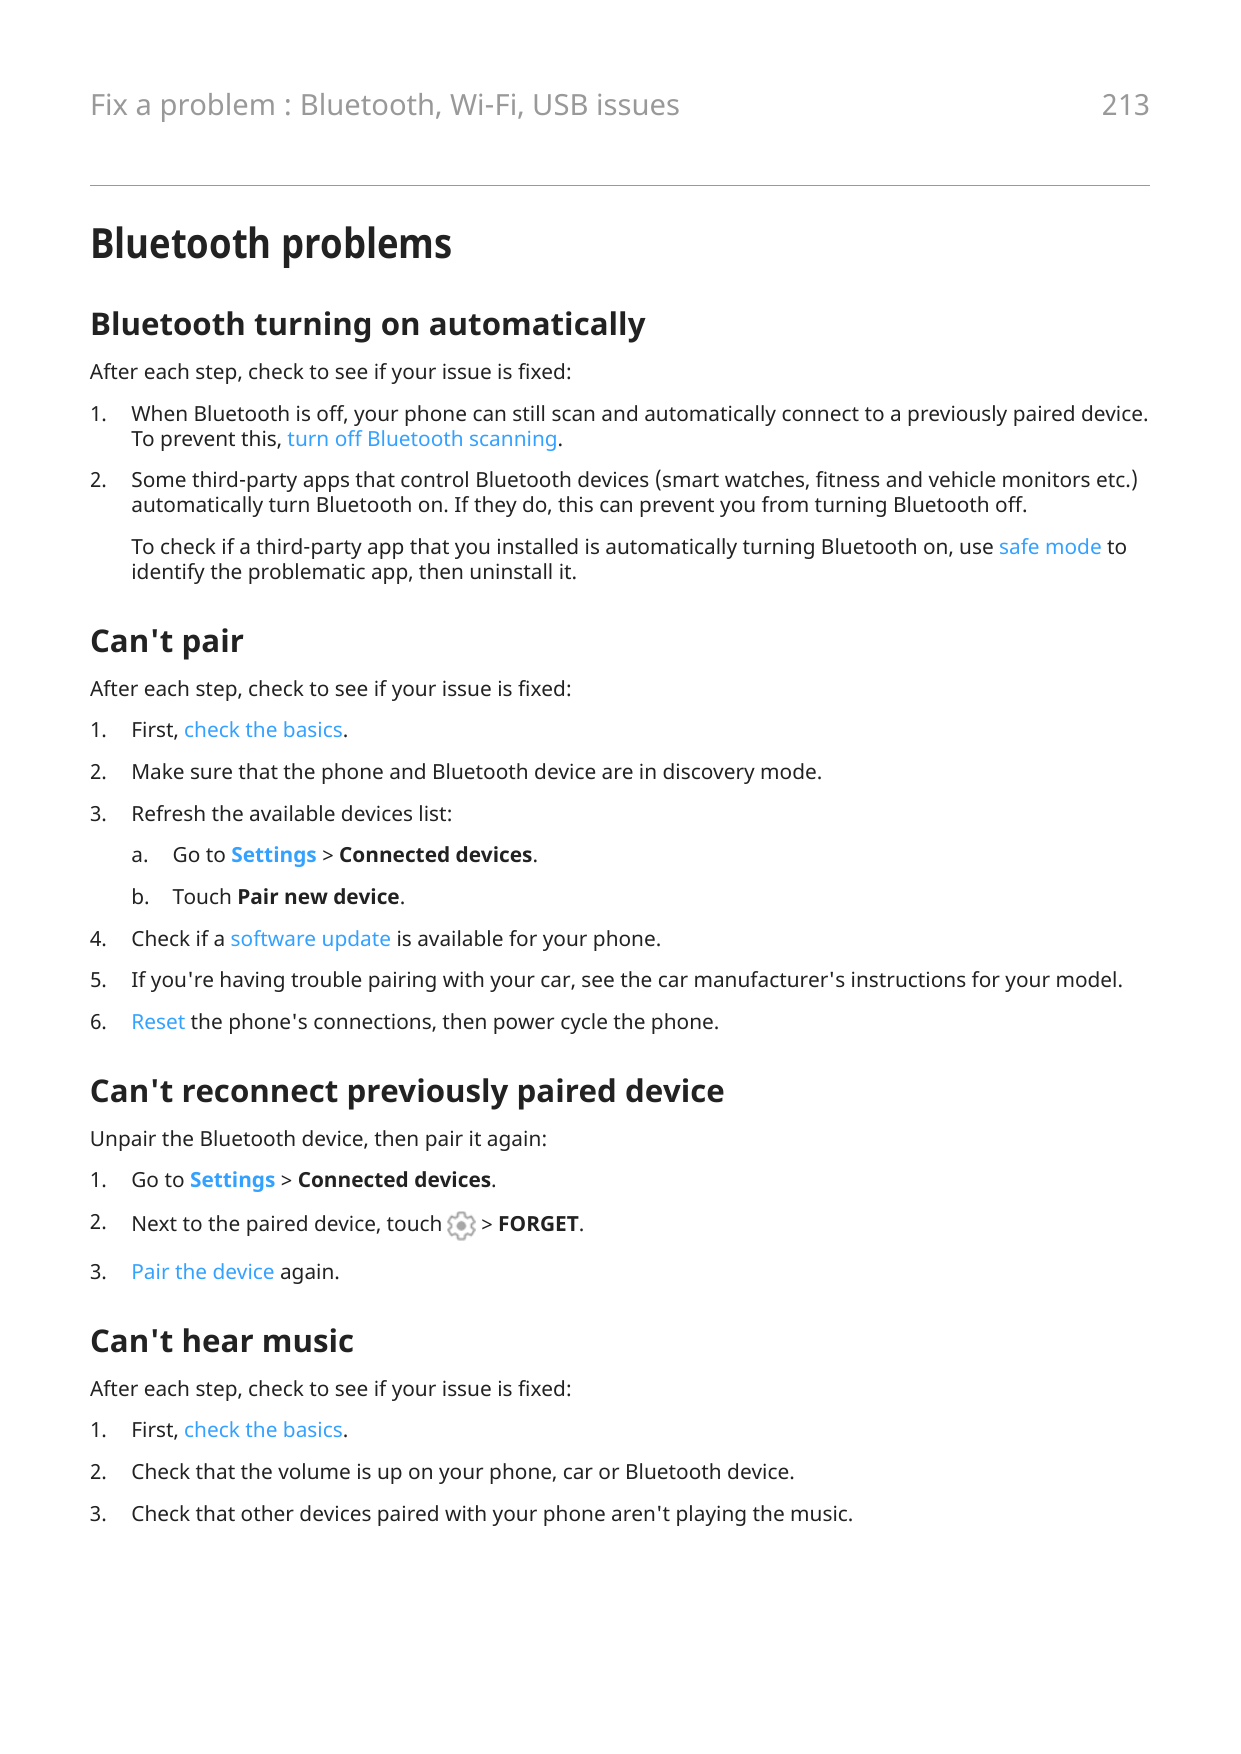 Fix a problem : Bluetooth, Wi-Fi, USB issues213Bluetooth problemsBluetooth turning on automaticallyAfter each step, check to see